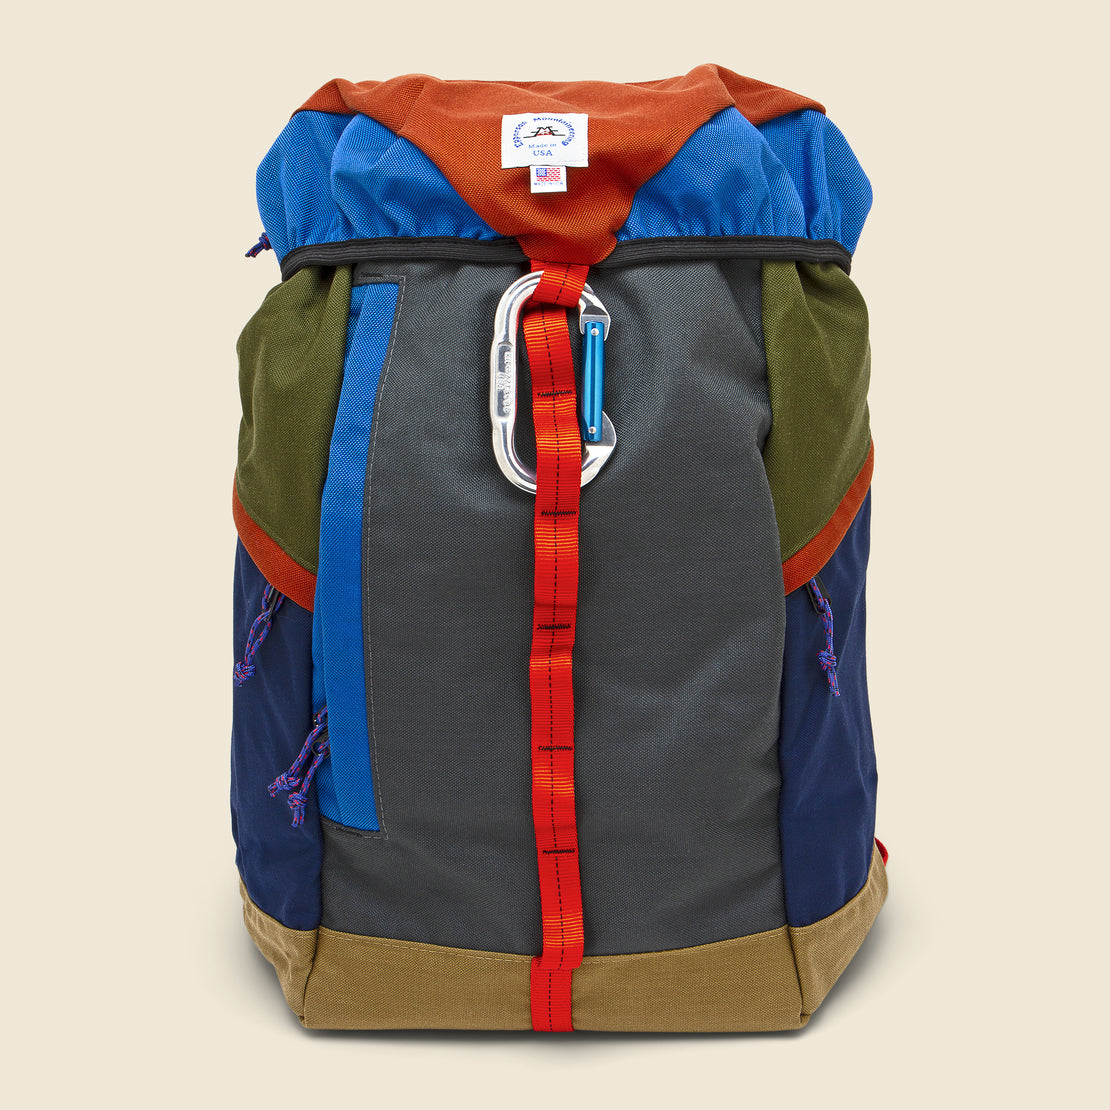 Epperson Mountaineering Large Climb Pack - Clay/Steel